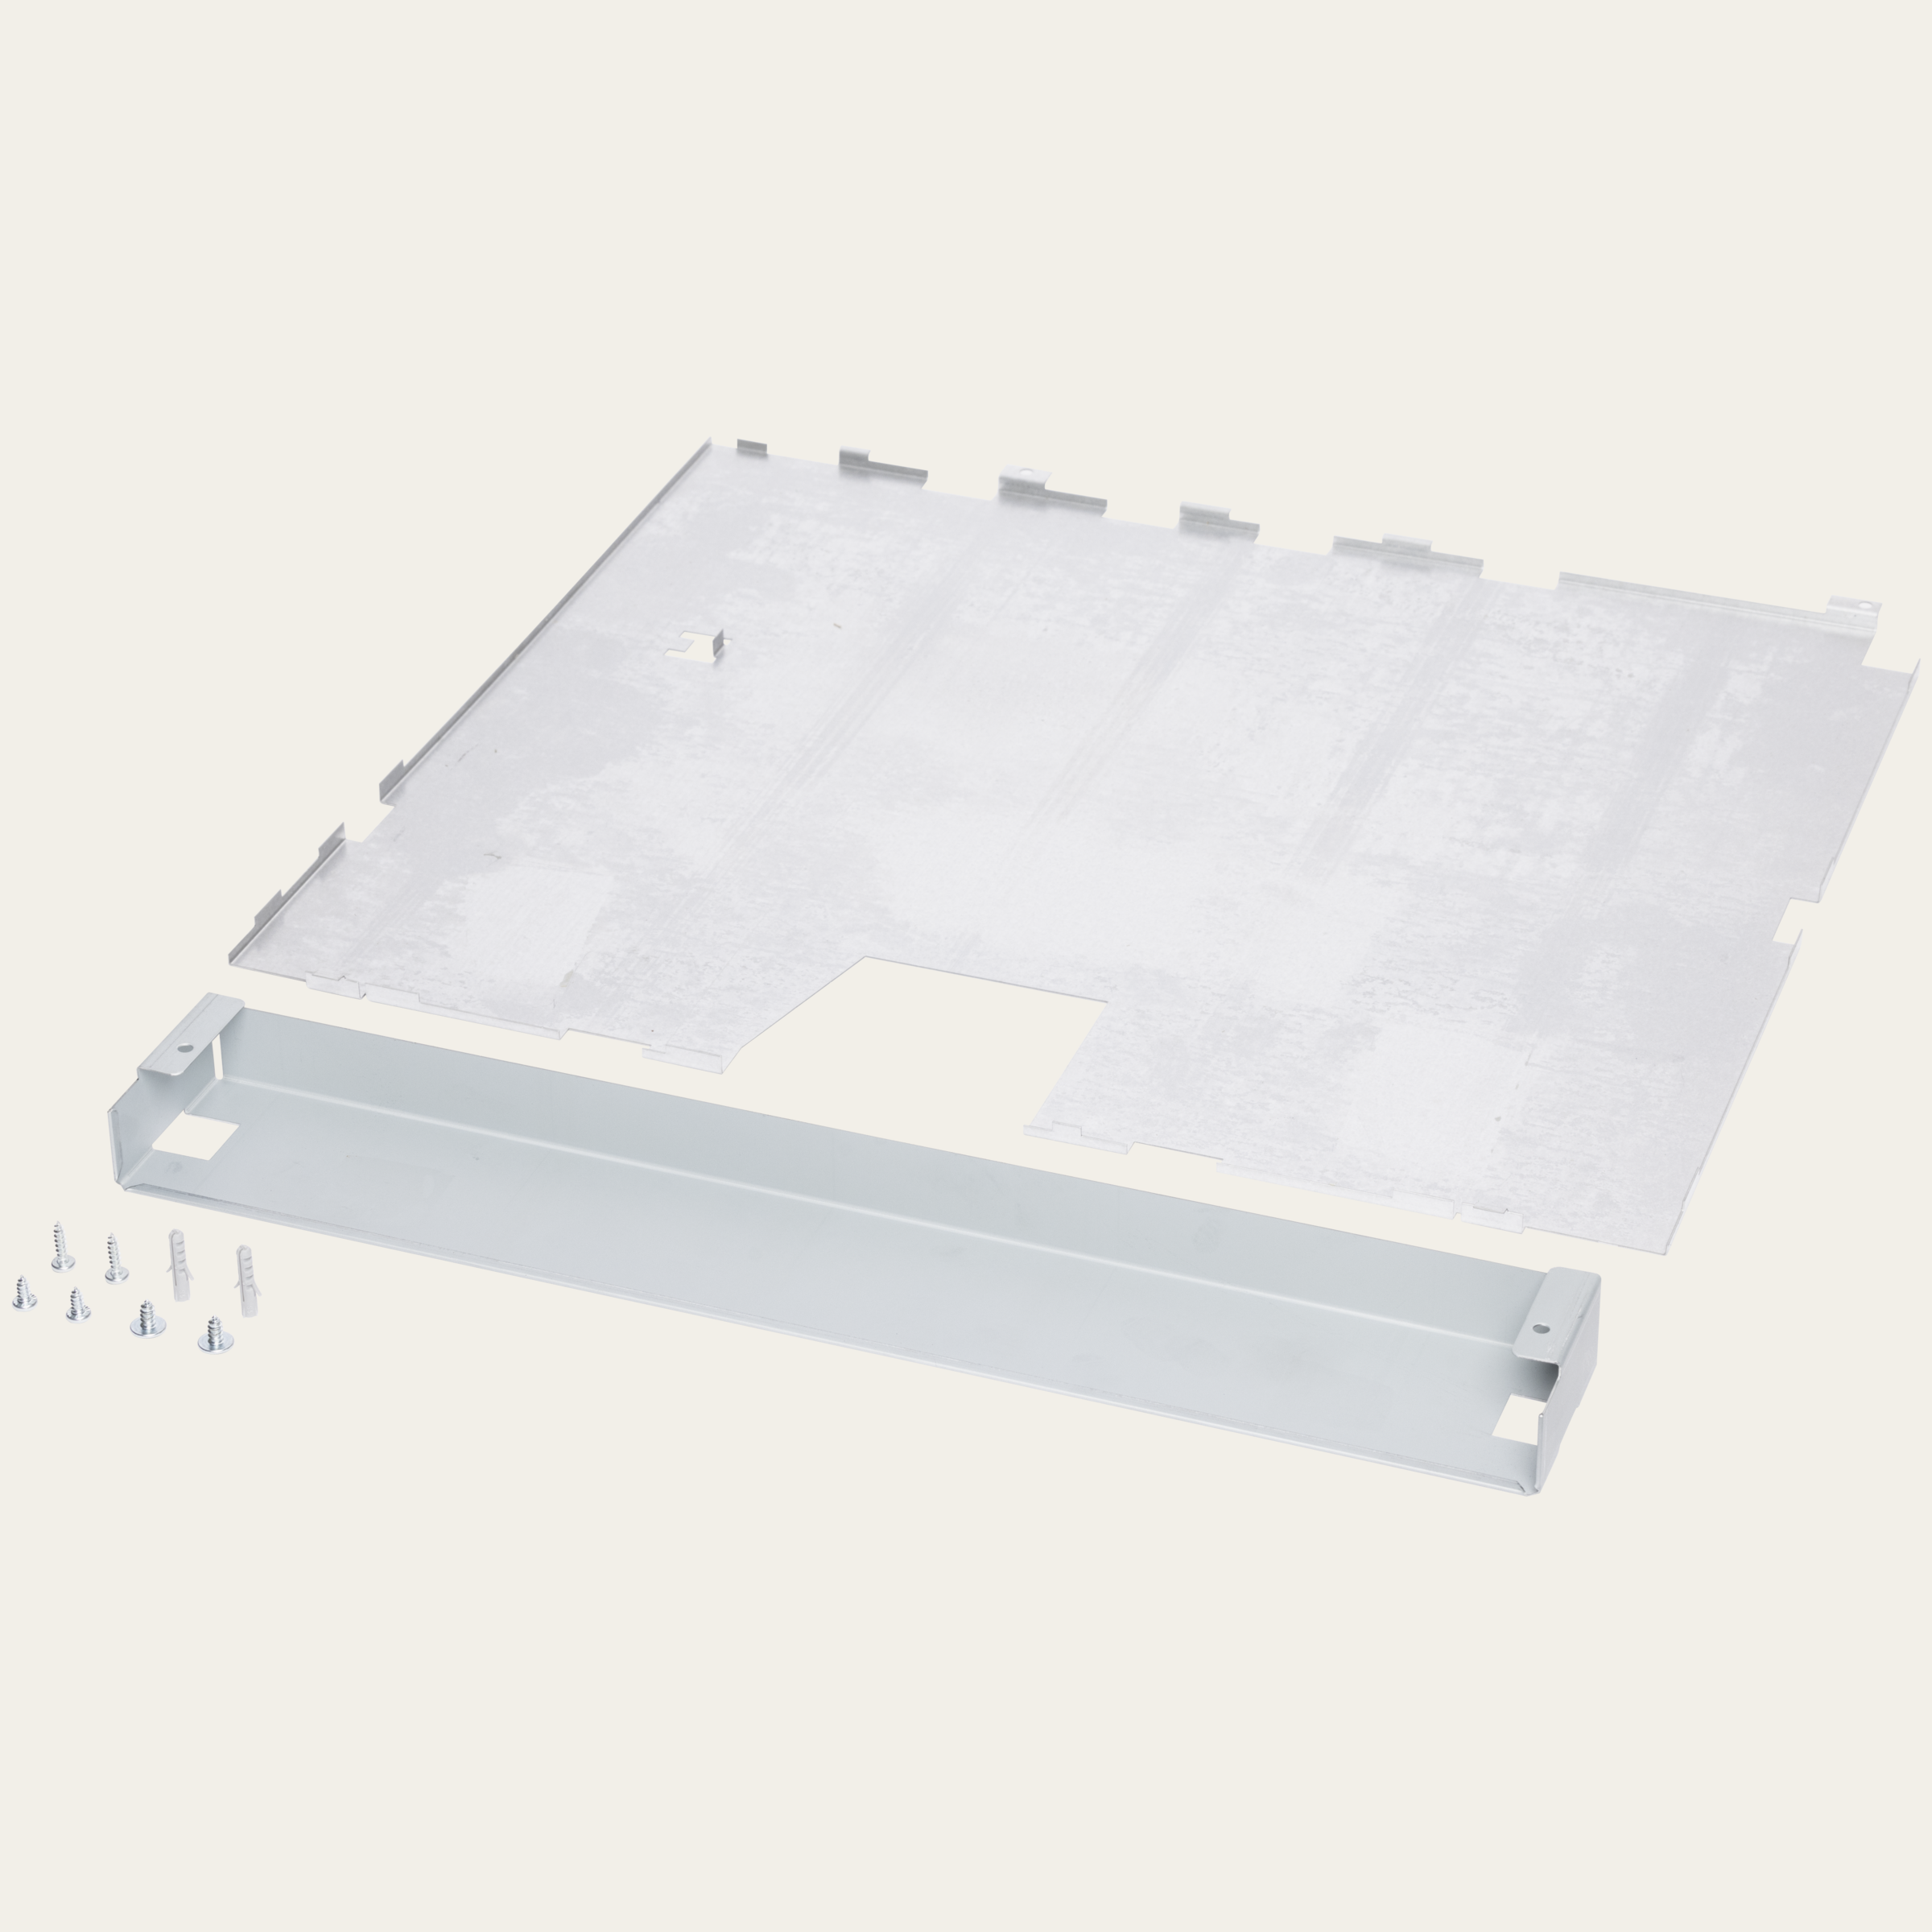 Thermal shielding plate set for GK45TE / TEU / TEF / TEXC / TEXF